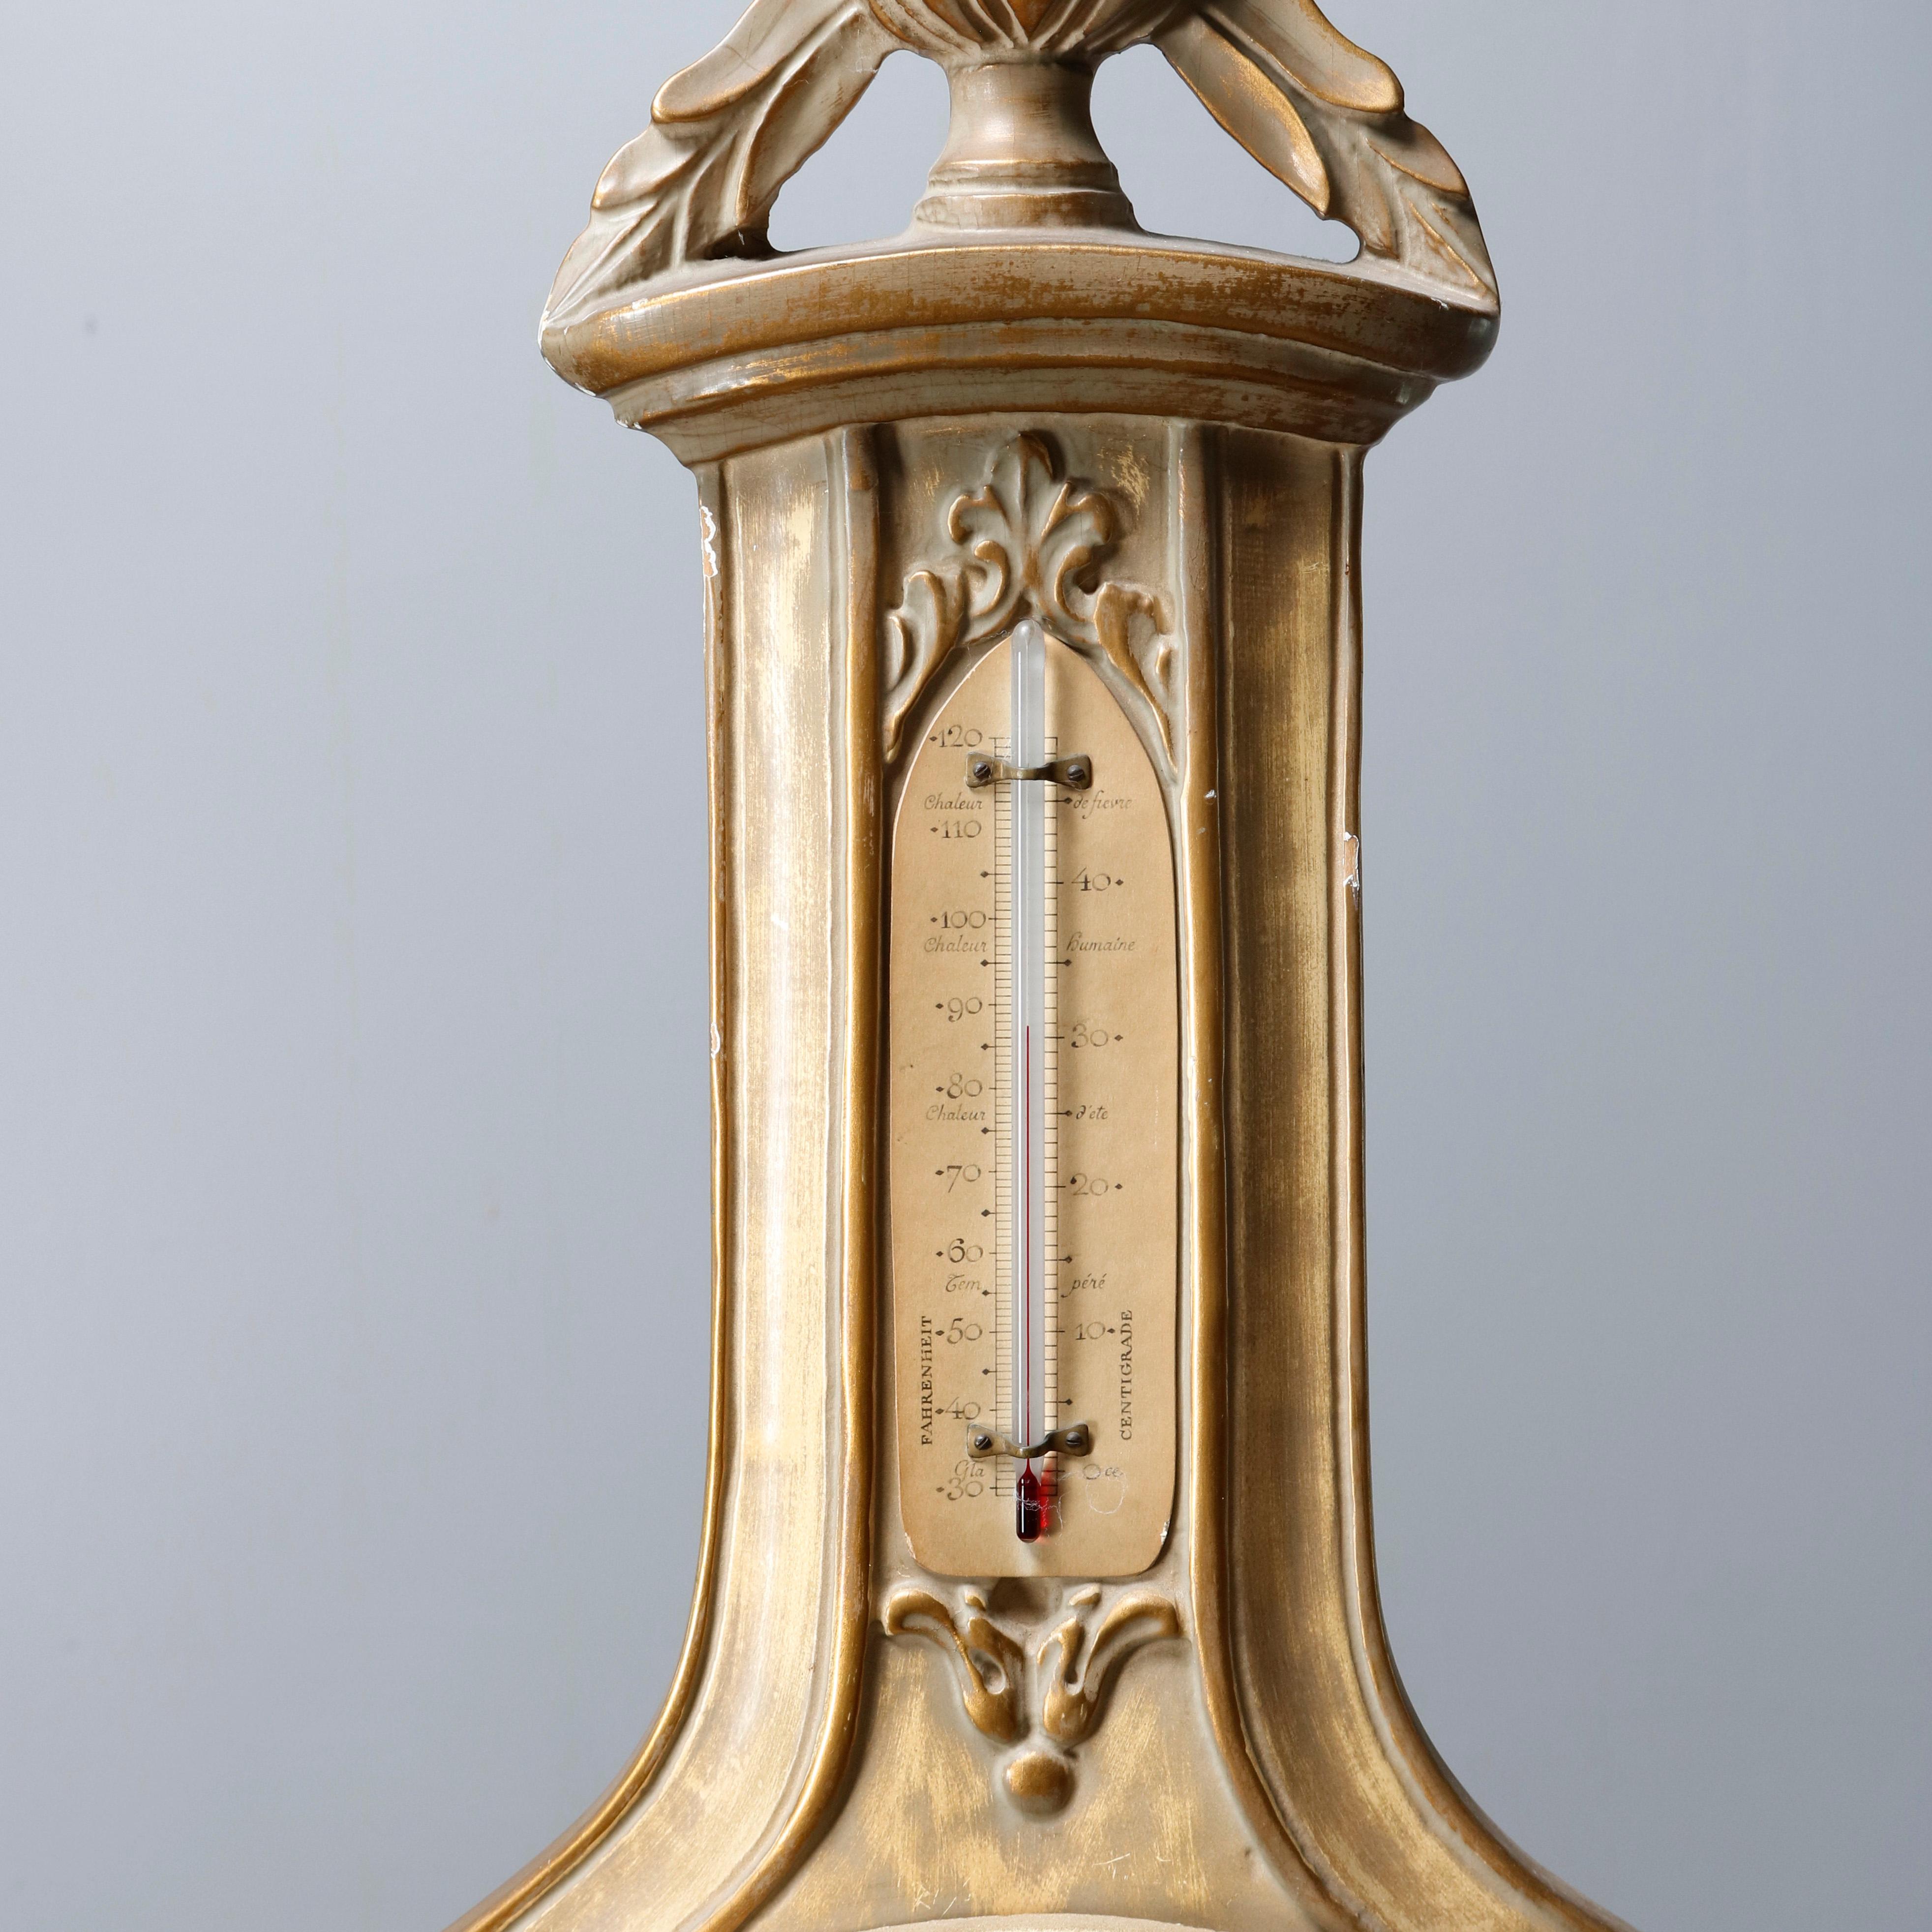 Contemporary French Neoclassical Styled Wall Barometer, Bollenbach, 20th Century 1